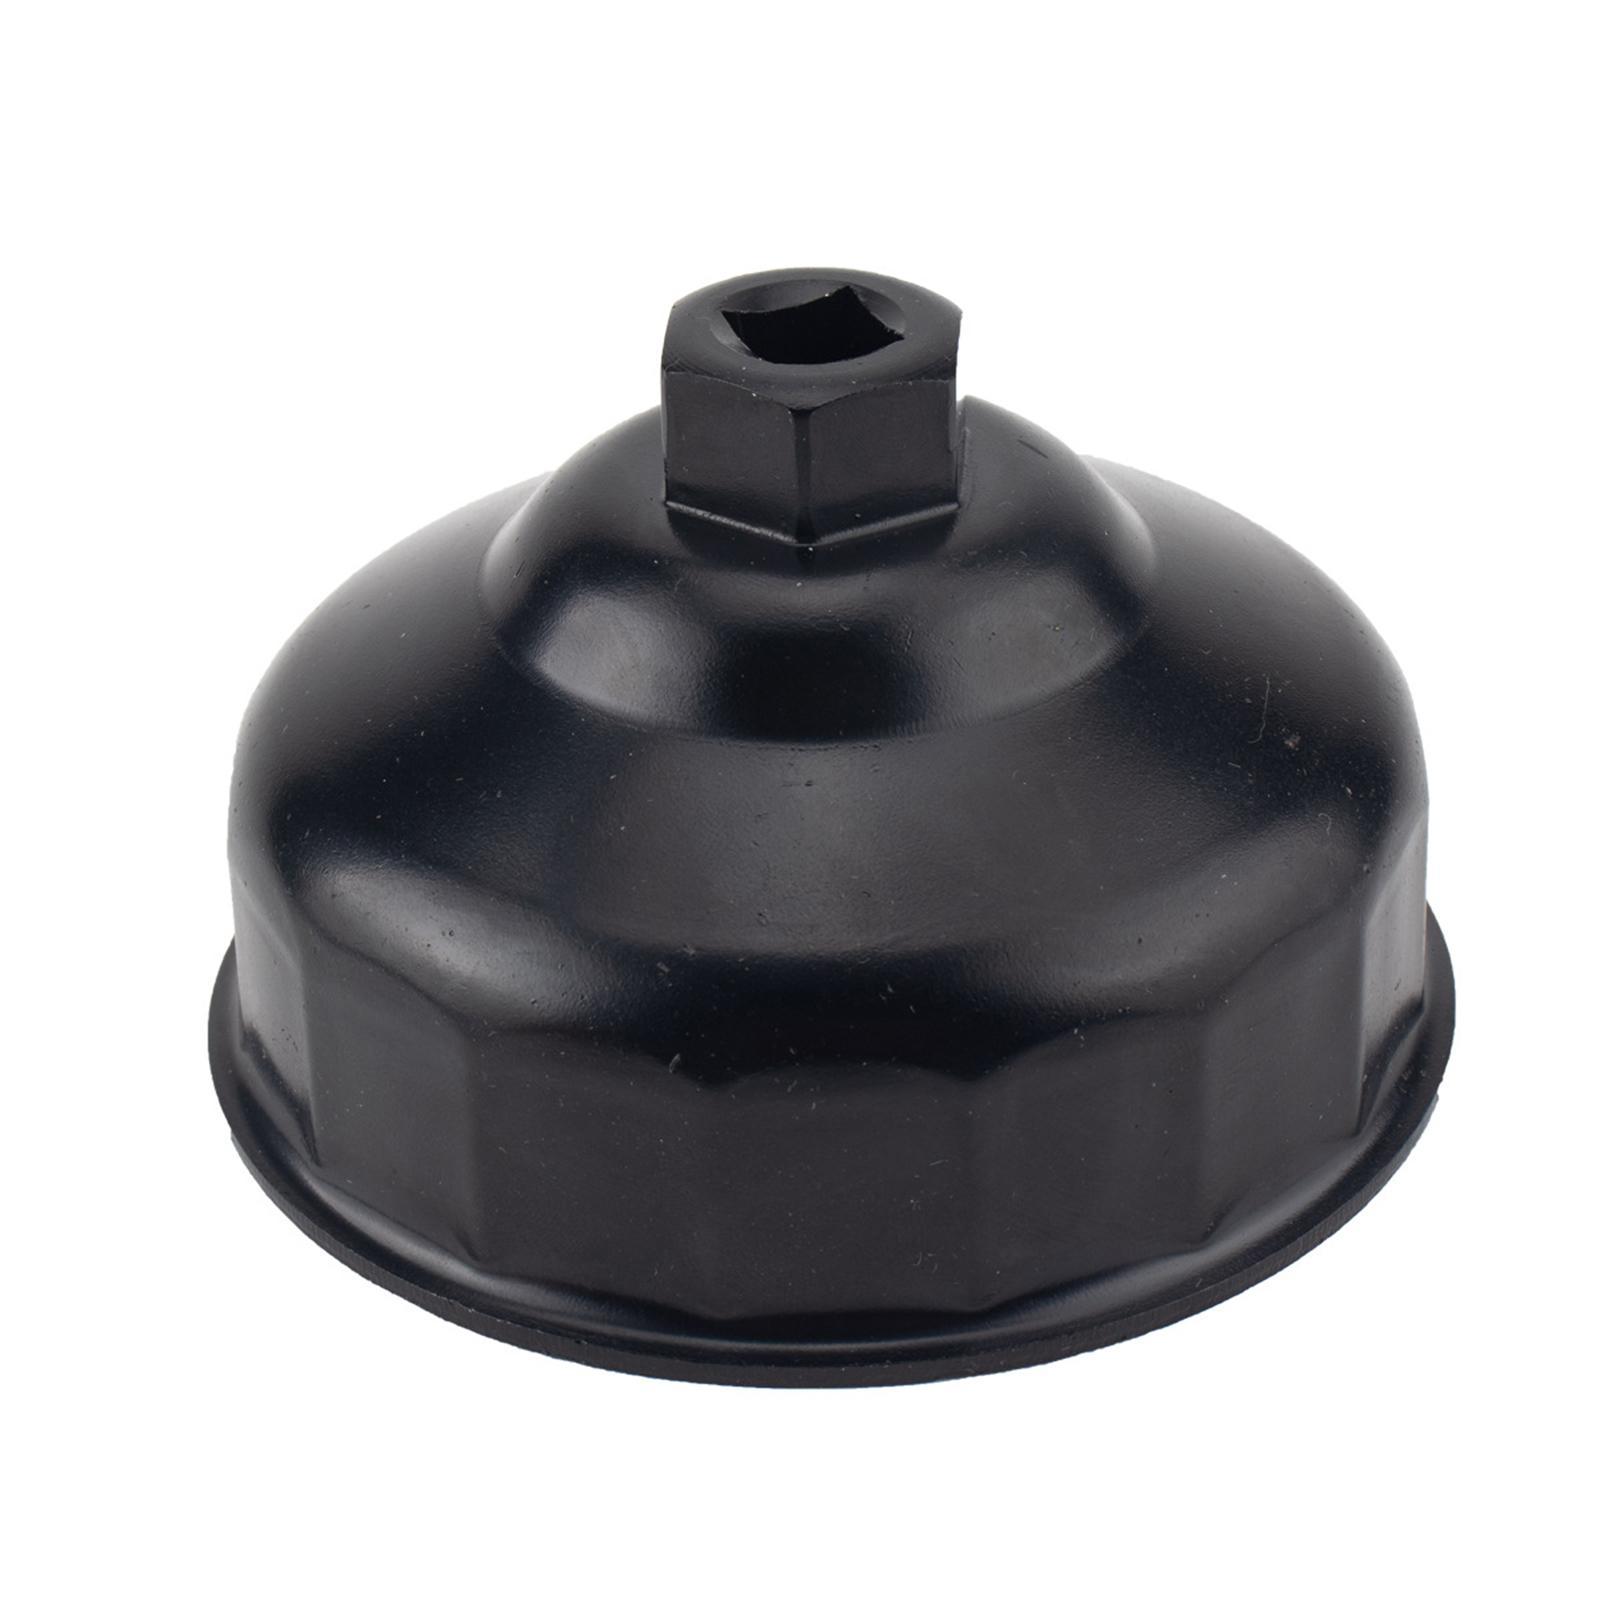 Oil Filter Housing Cover Caps, 11427525334 Replacement Fits for BMW x1 x3 x4 x5 x6